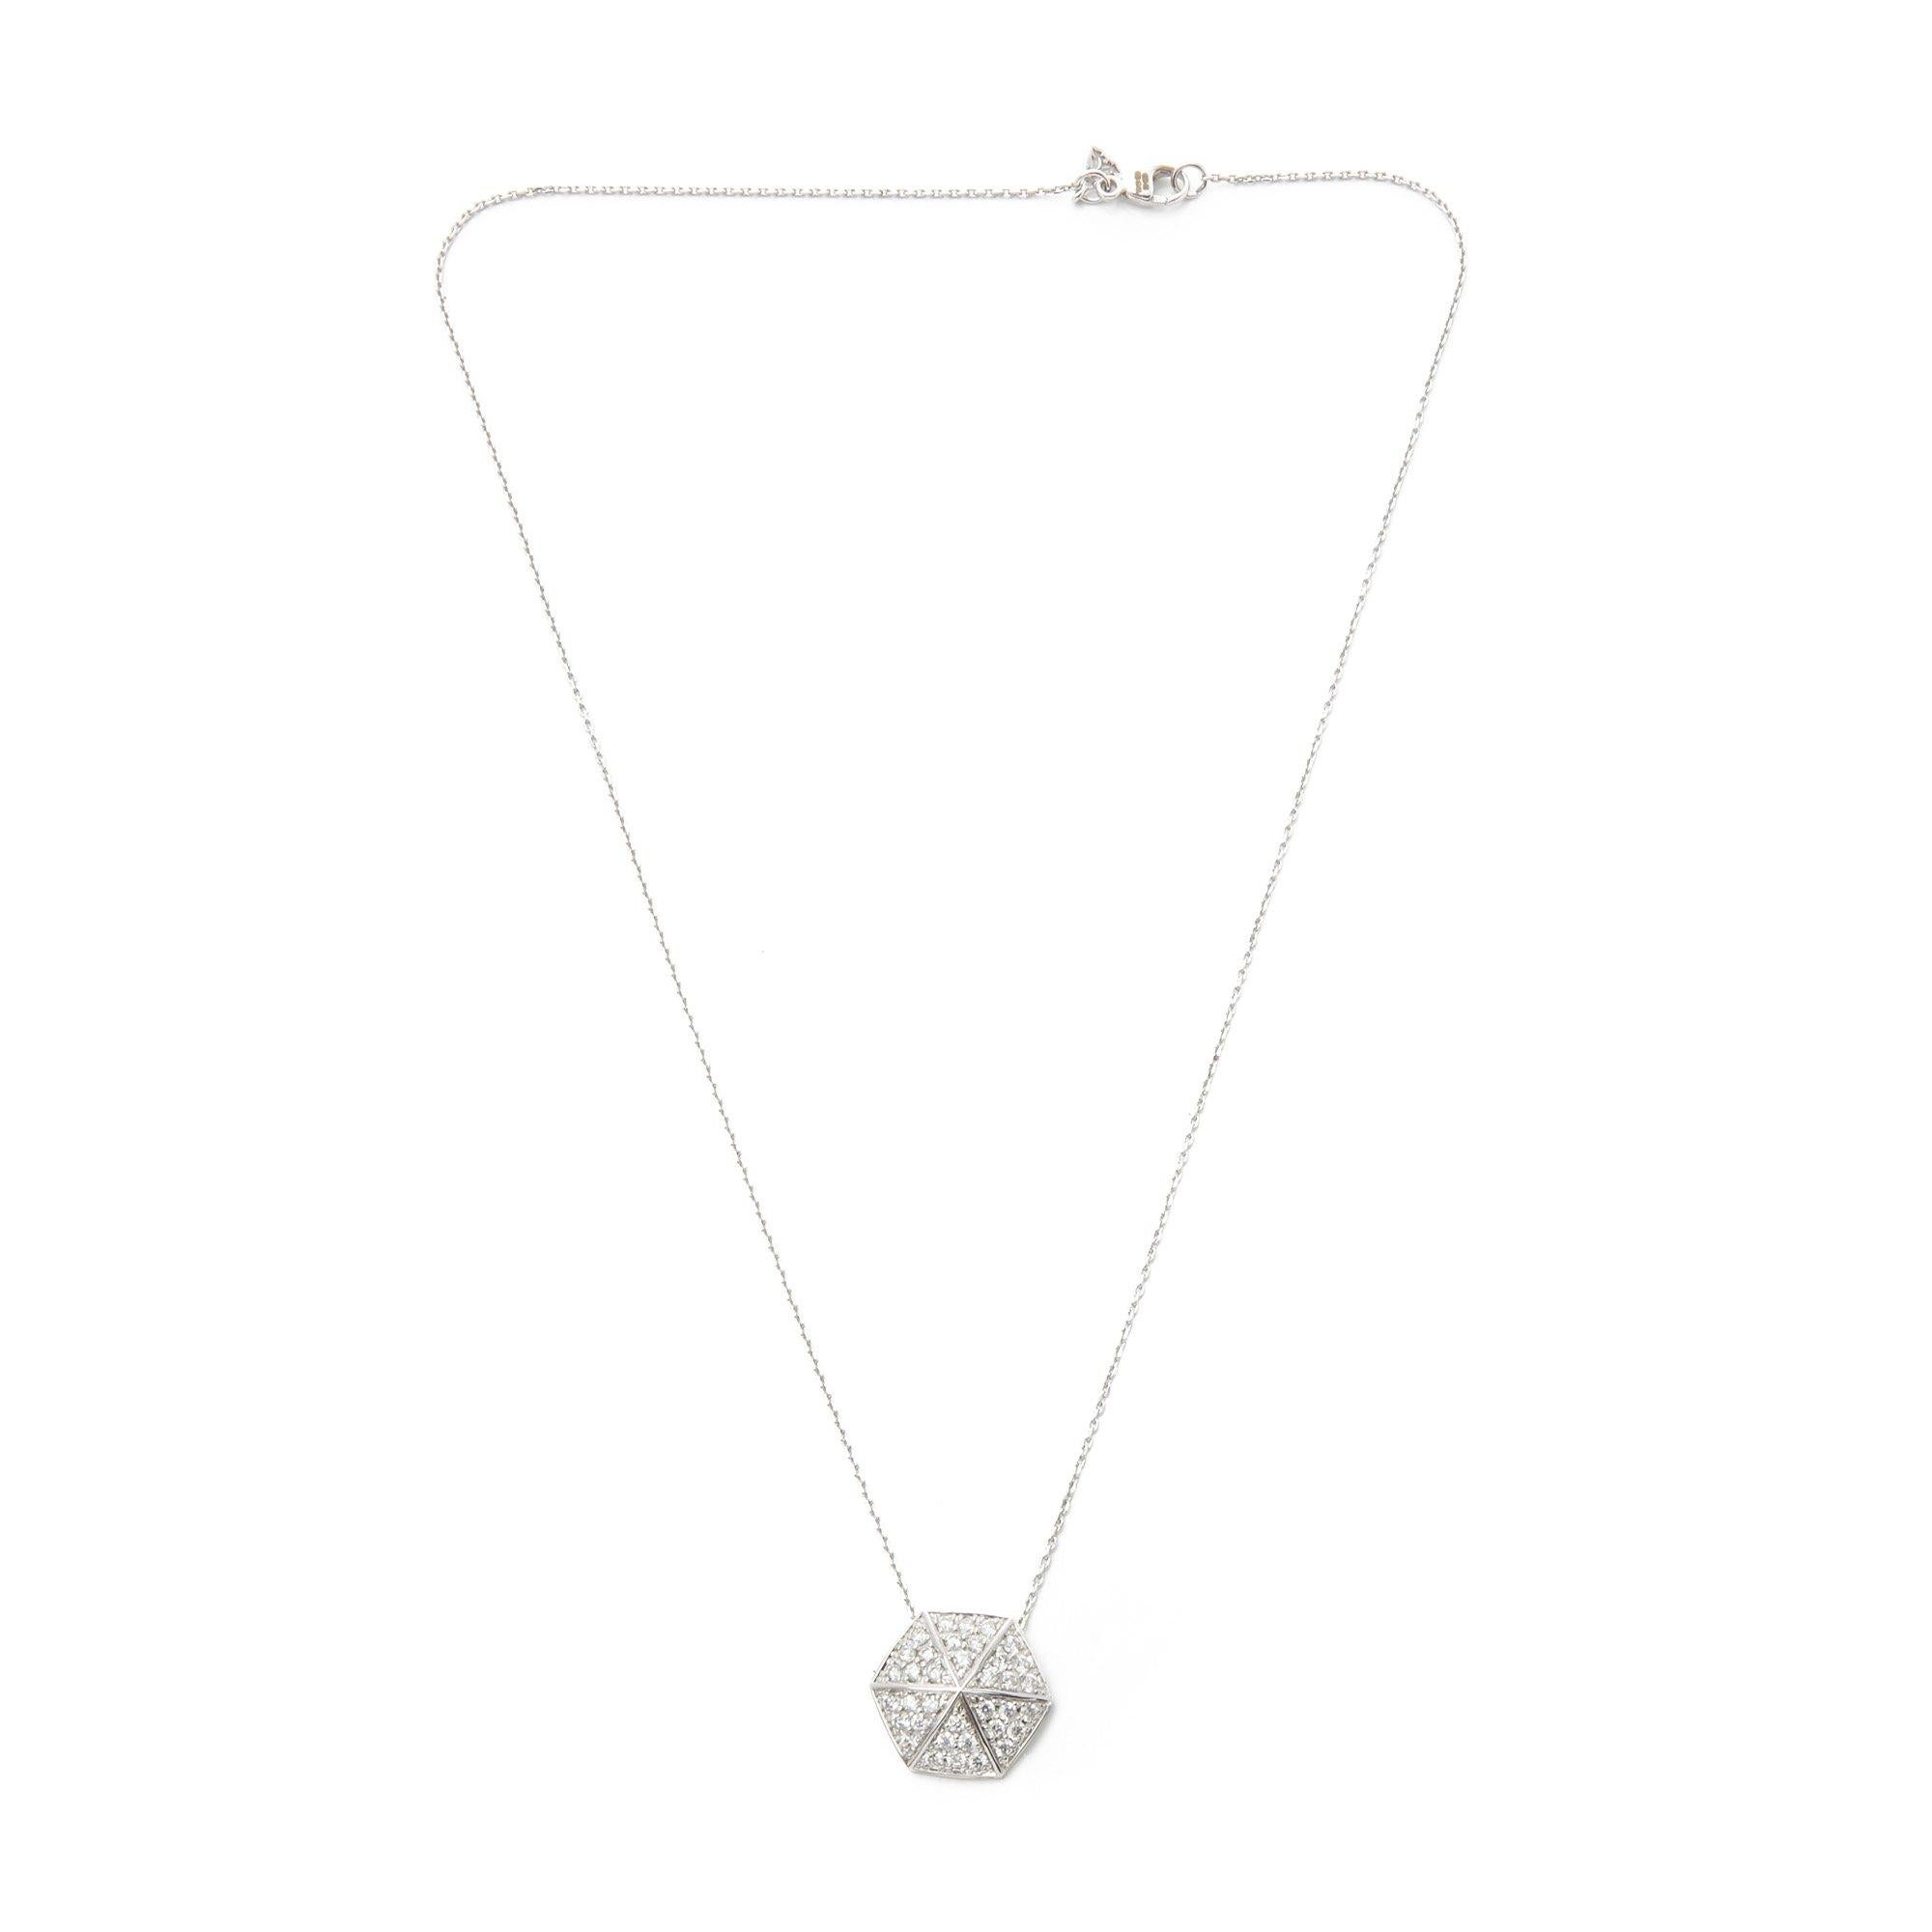 This Pendant by Stephen Webster is from his Deco Collection and features Six Pave Round Briliant Diamond set sections with a total of Thirty Six stones forming a Hexagonal shape. Set in 18k White Gold with 41cm Trace Link Chain. Complete with Xupes